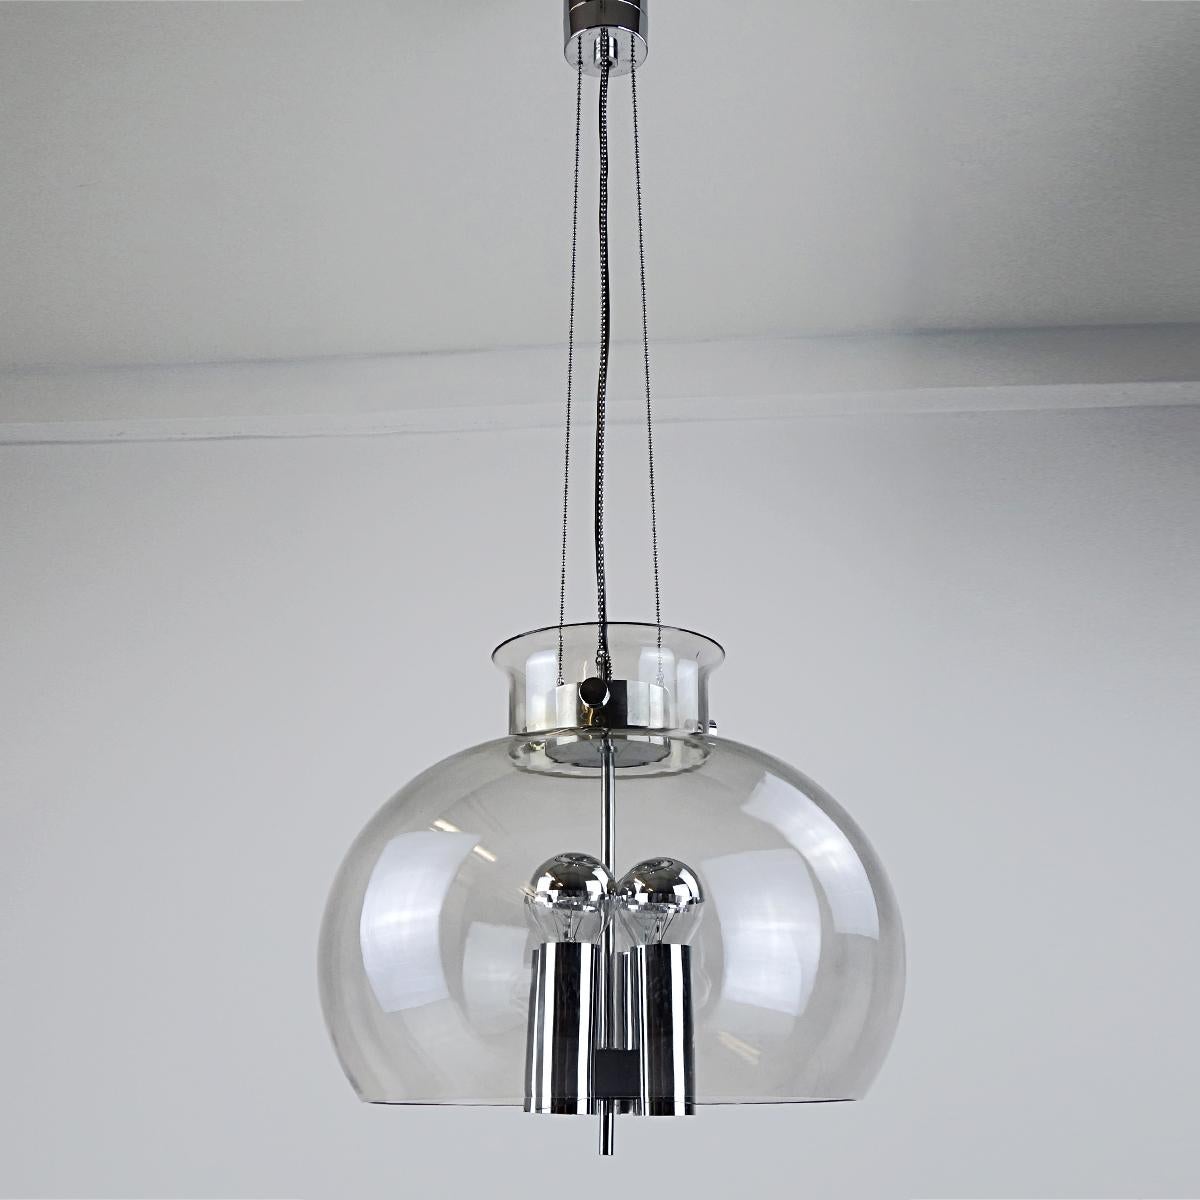 Large Midcentury Glass Ball Pendant with Chrome Hardware by Glasshütte Limburg In Good Condition For Sale In Doornspijk, NL